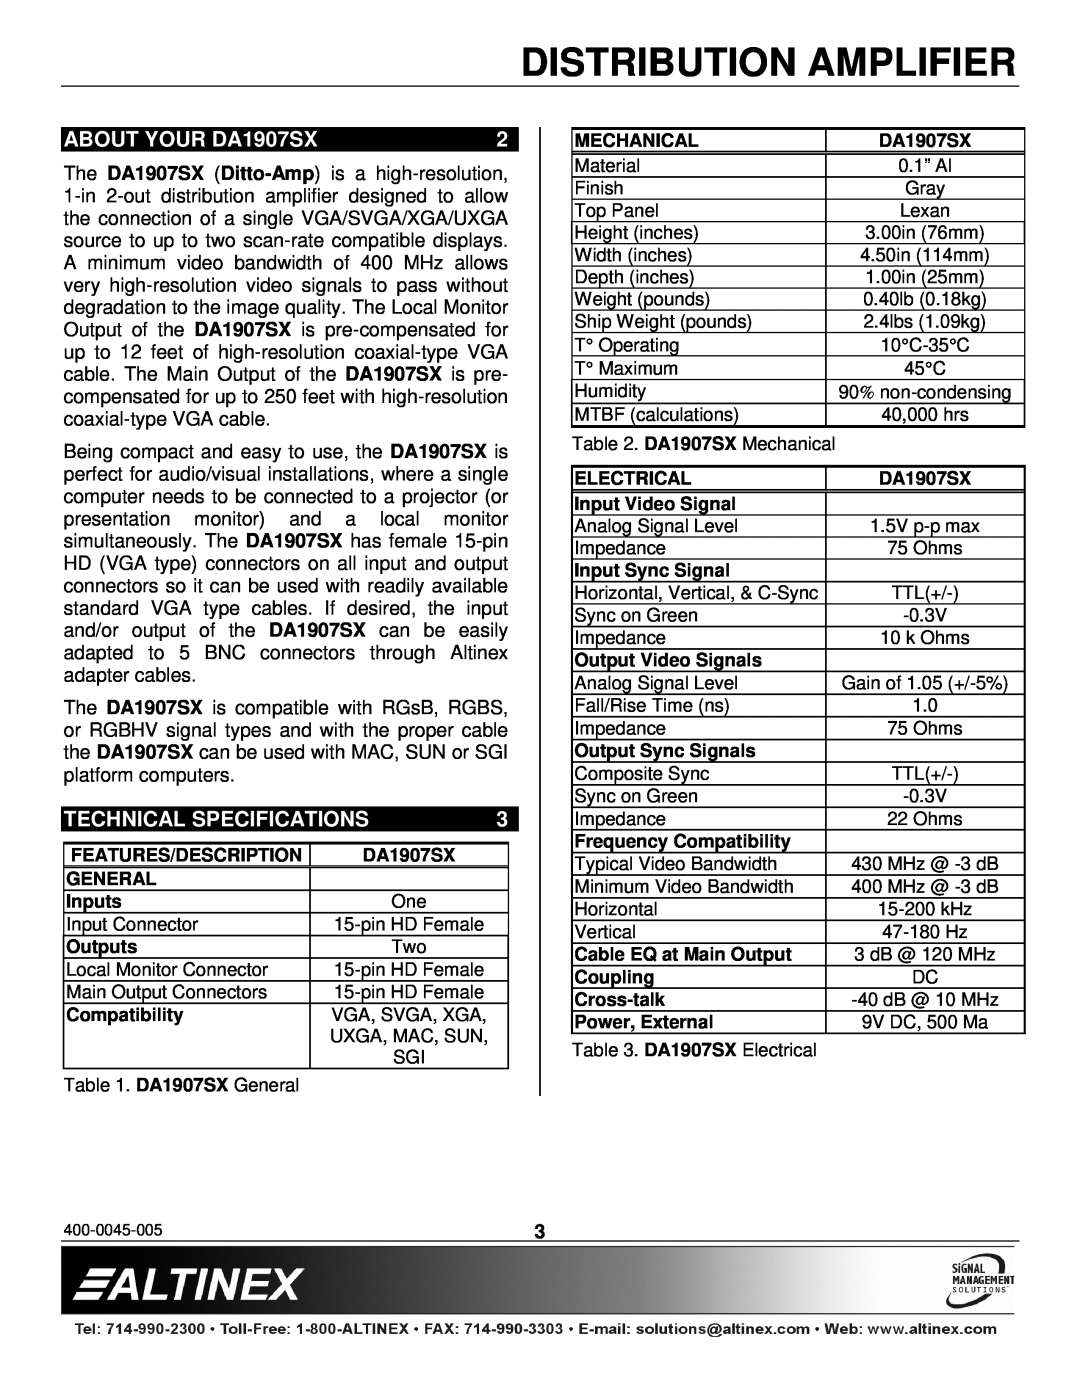 Altinex manual ABOUT YOUR DA1907SX, Technical Specifications, Distribution Amplifier 